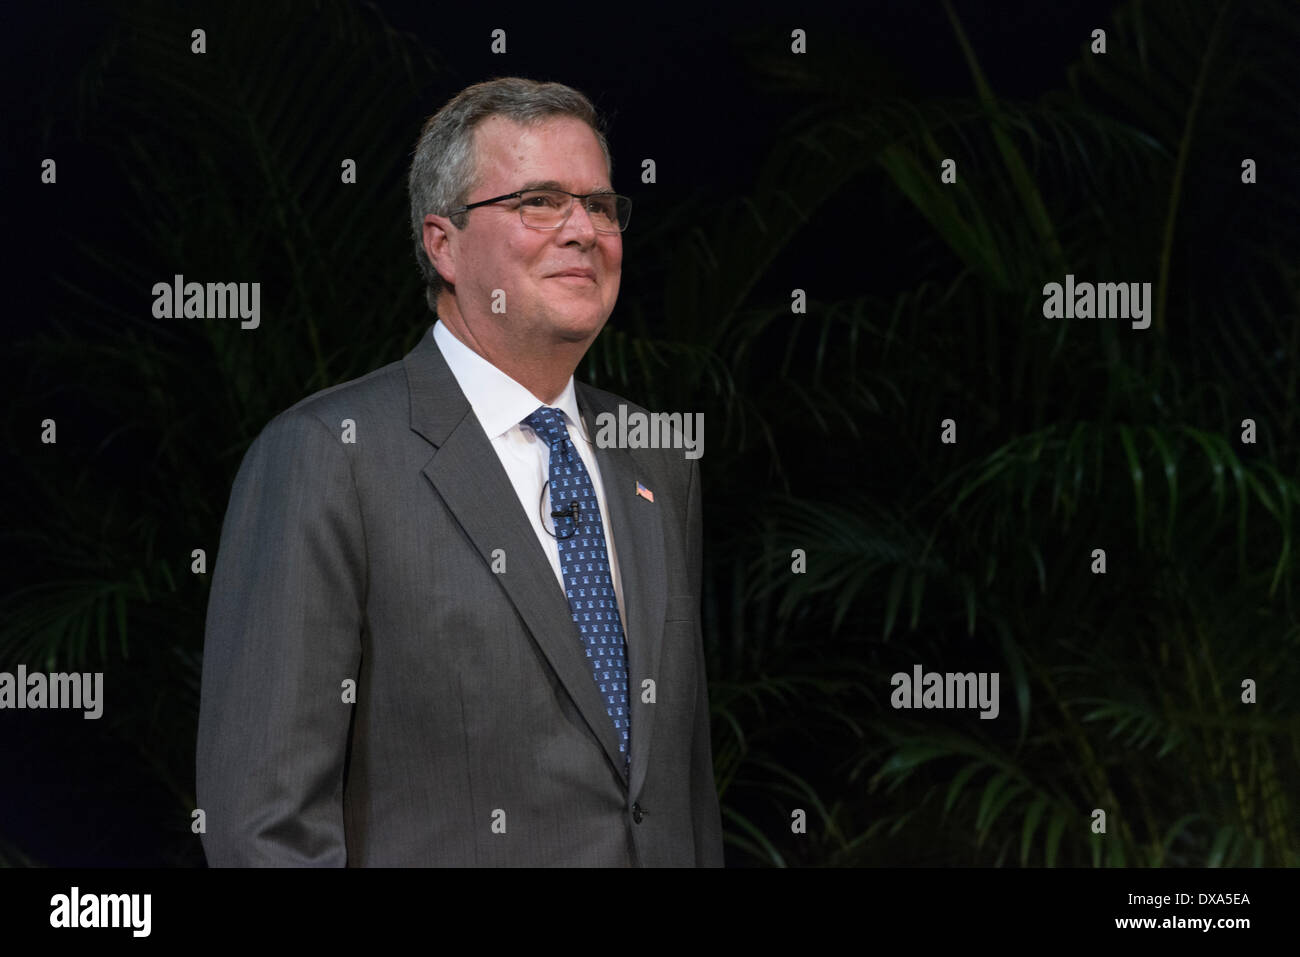 Winter Park, Florida, USA. 20th Mar, 2014. Gov. Jeb Bush speaks to conservative group in Central Florida. Bush explains challenges America faces. Governor of Florida 1999-2007, Bush is pondering run for USA presidential race 2016. Brother of George W. & son of George H.W. Bush (US Presidents) Jeb Bush is political blue blood. He co-authored book on immigration, his wife is Mexican-born immigrant. Immigration reform is hot button issue for 2016 elections. Mr. Bush is likely choice for Republicans in view of New Jersey Governor’s image tainted by bridge scandal. Credit:  Mary Kent/Alamy Live New Stock Photo